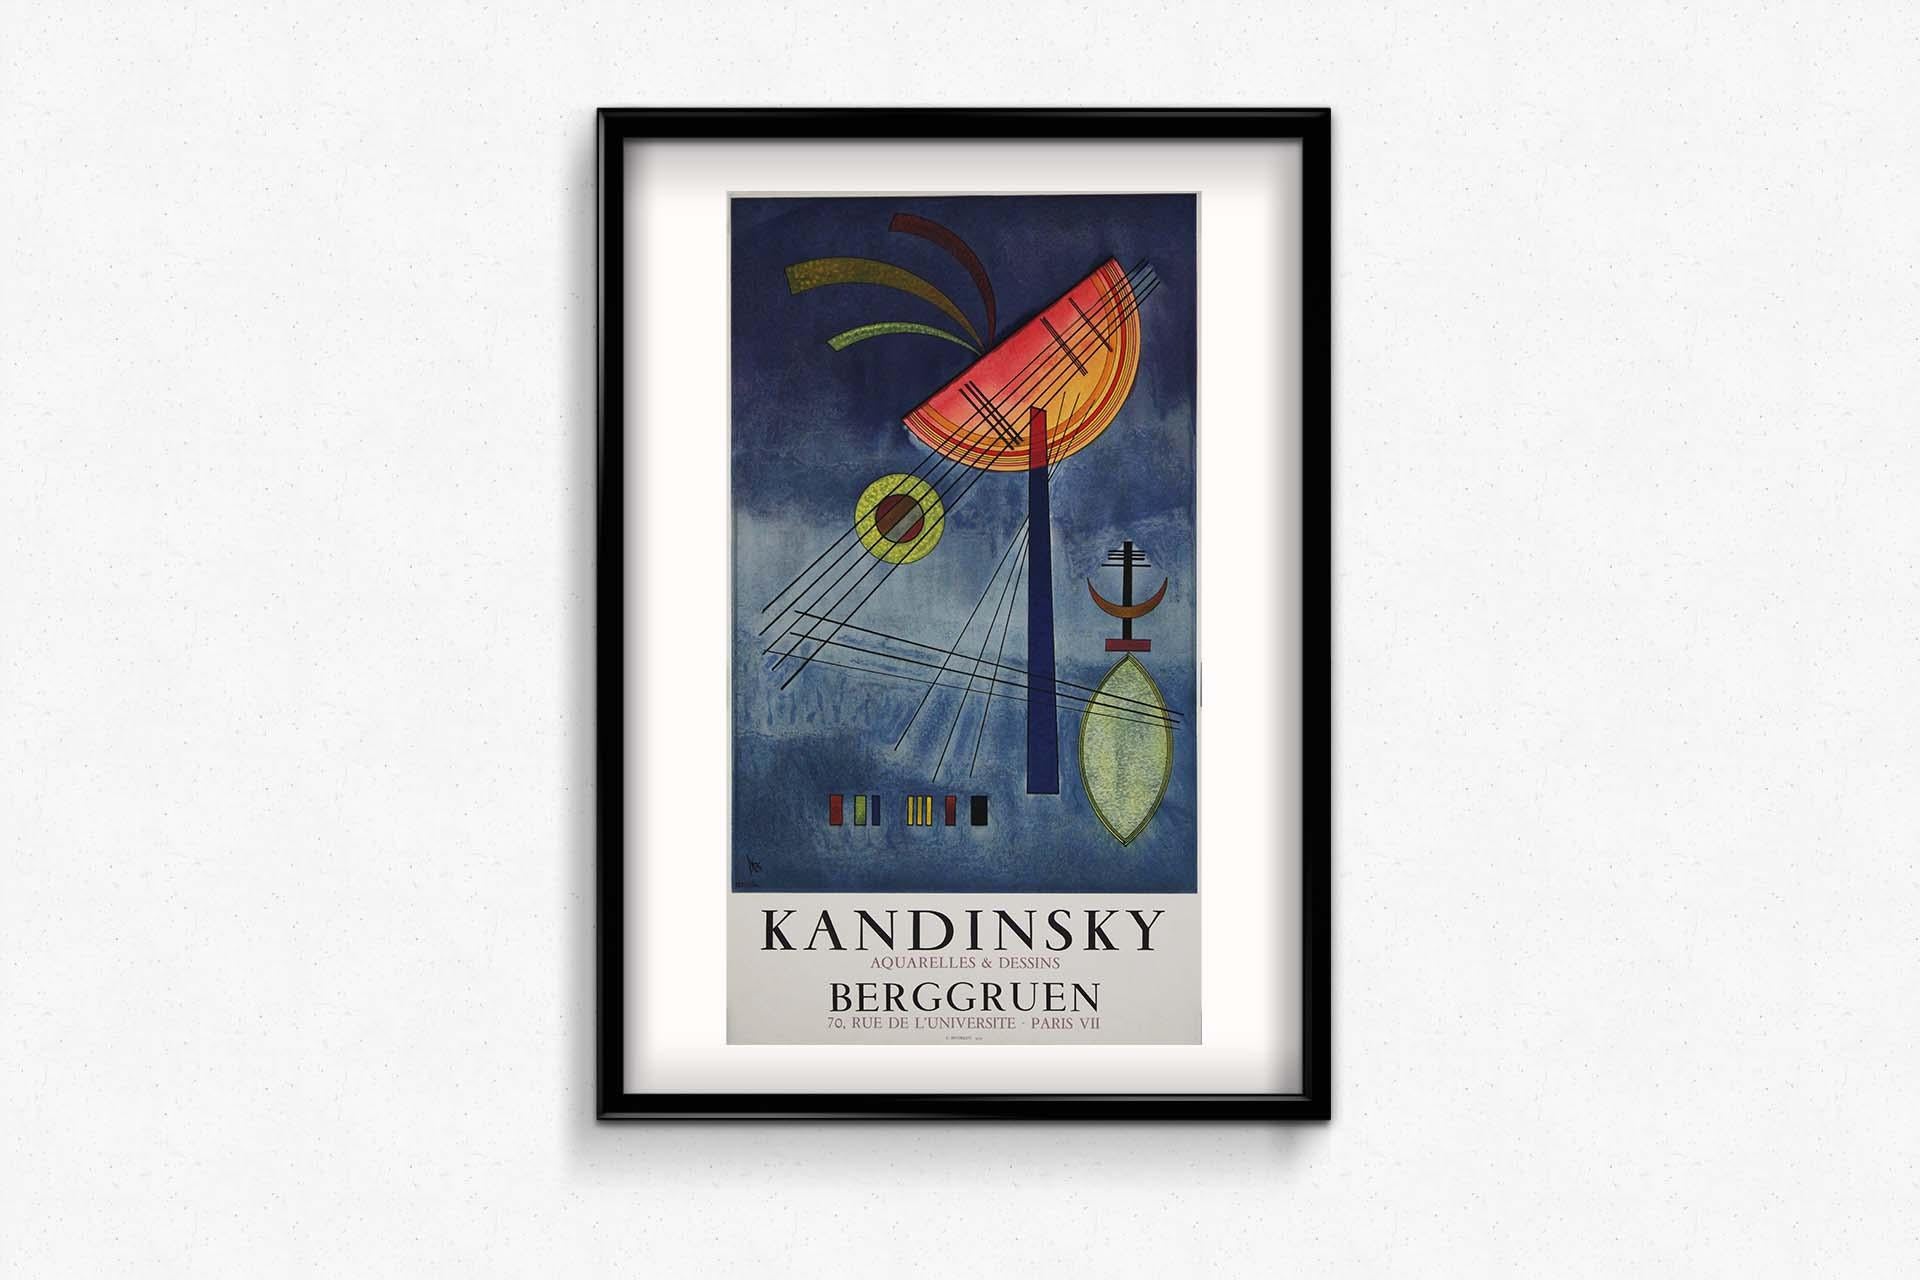 The original exhibition poster by Kandinsky, titled 